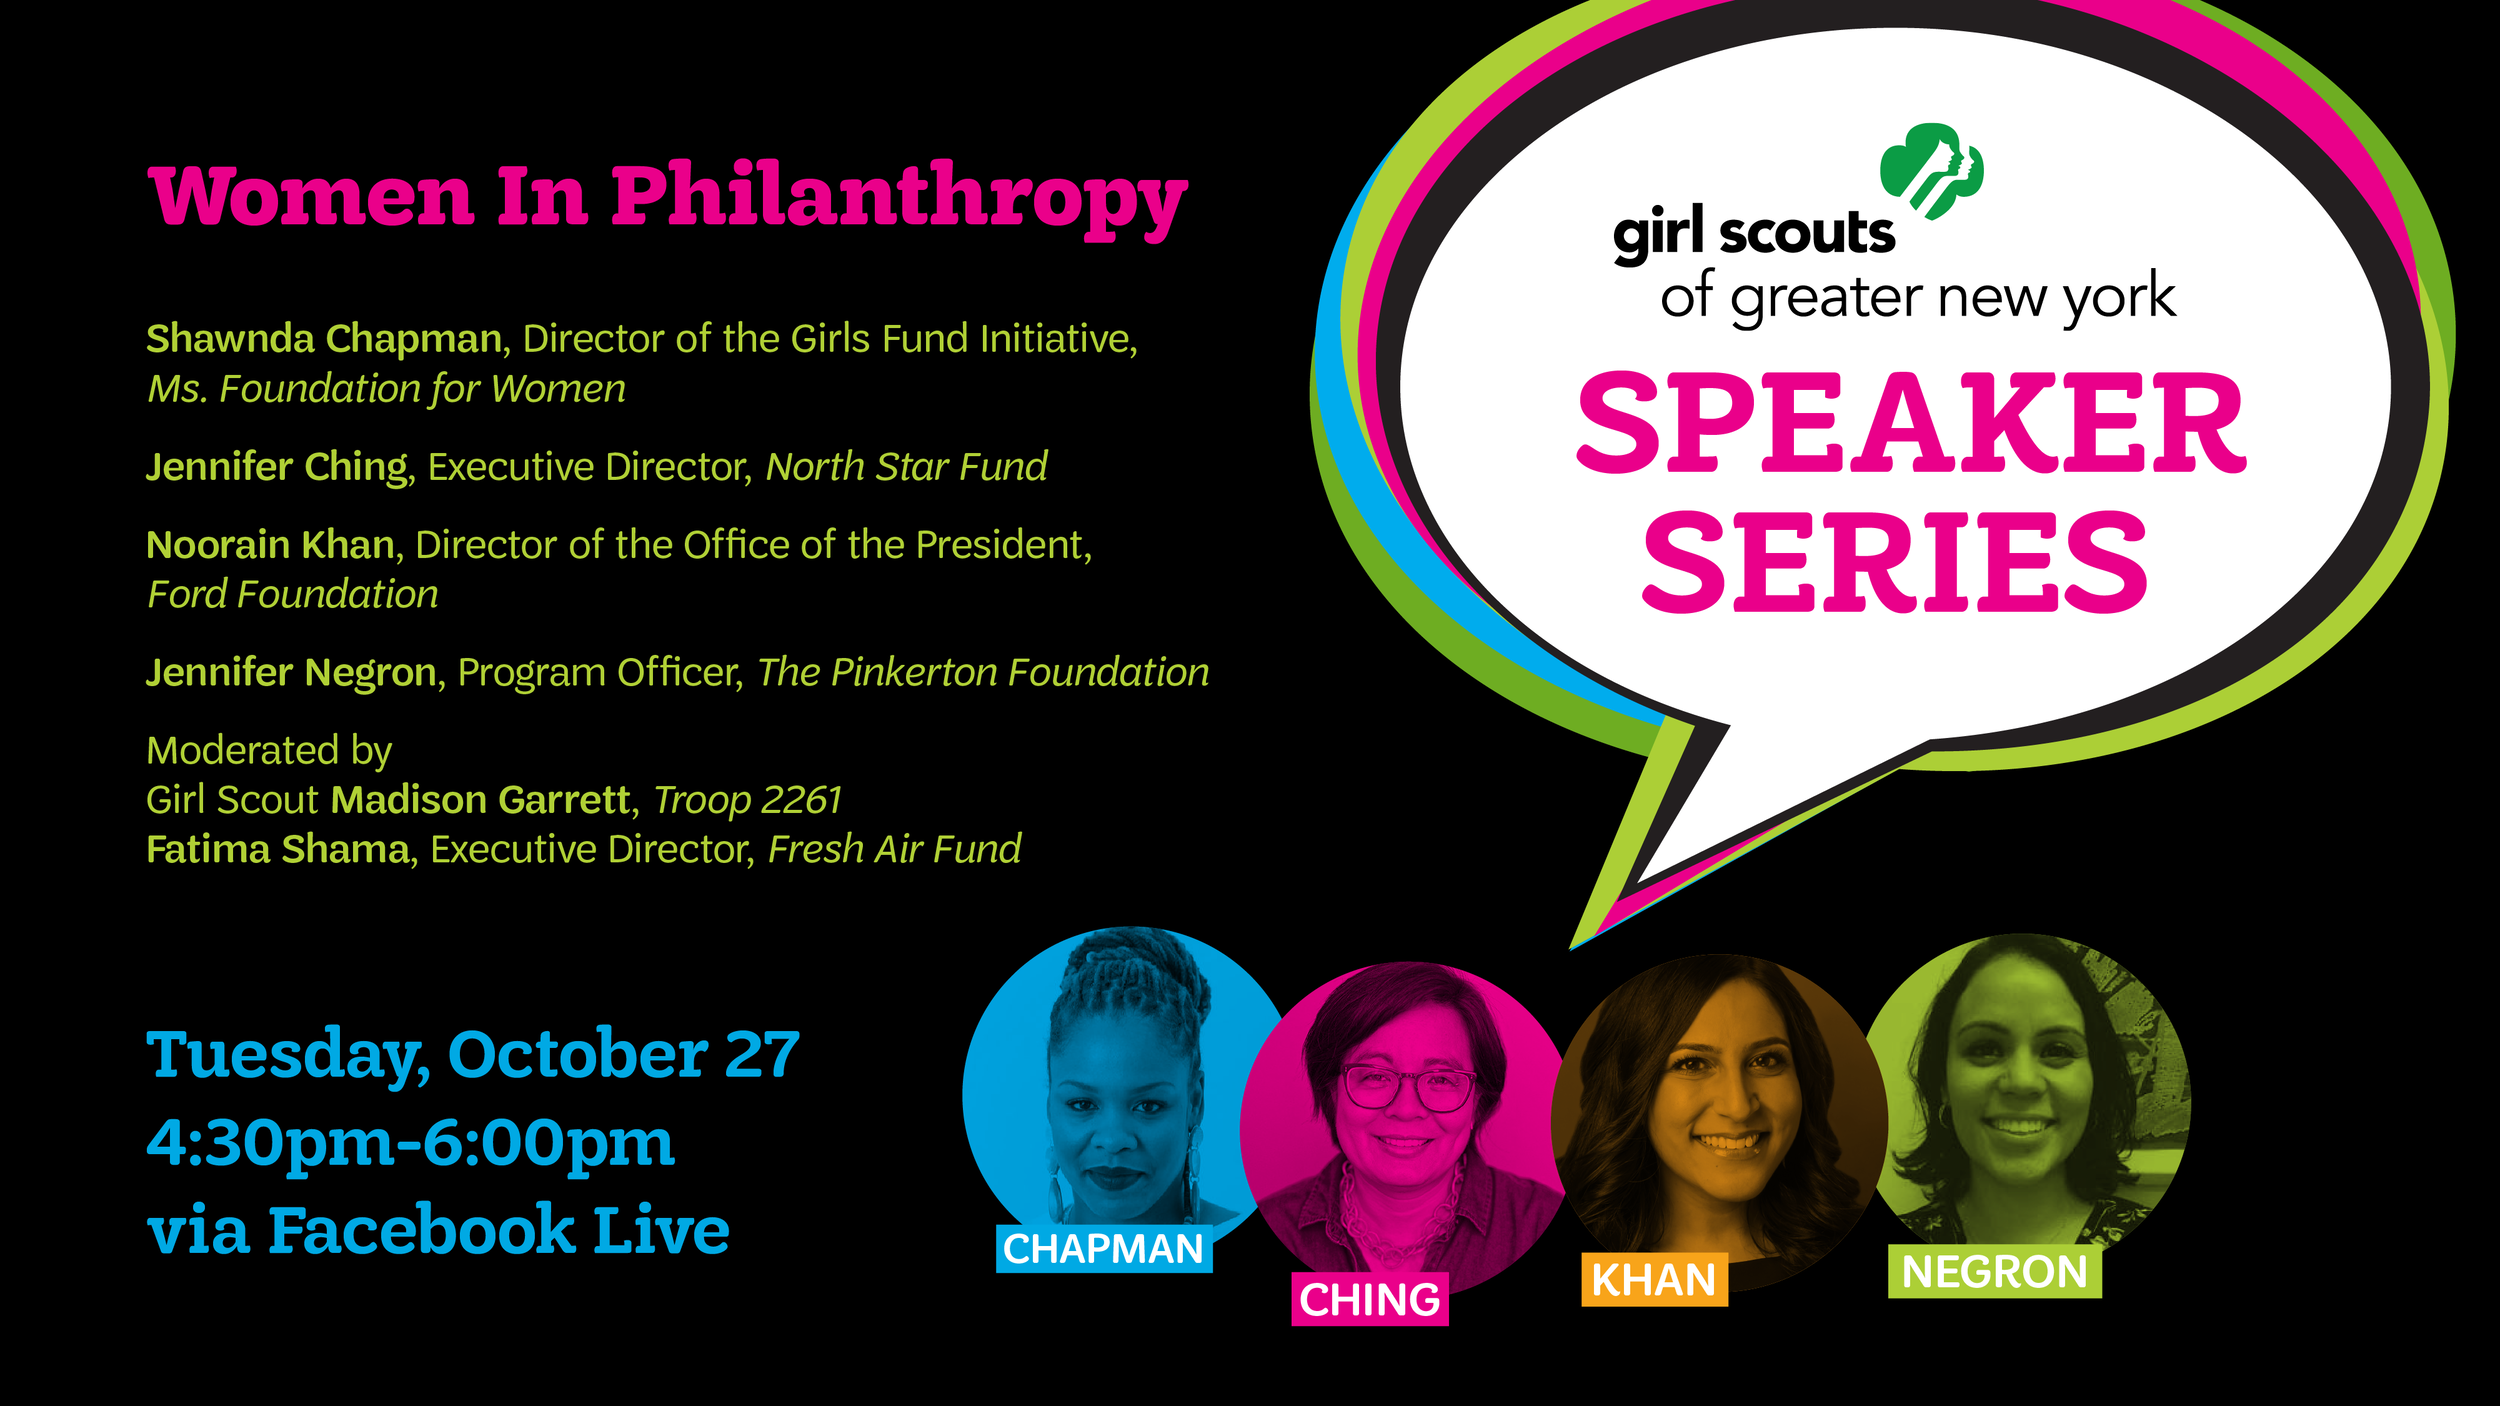 Speaker Series Campaign for Girl Scouts of Greater New York